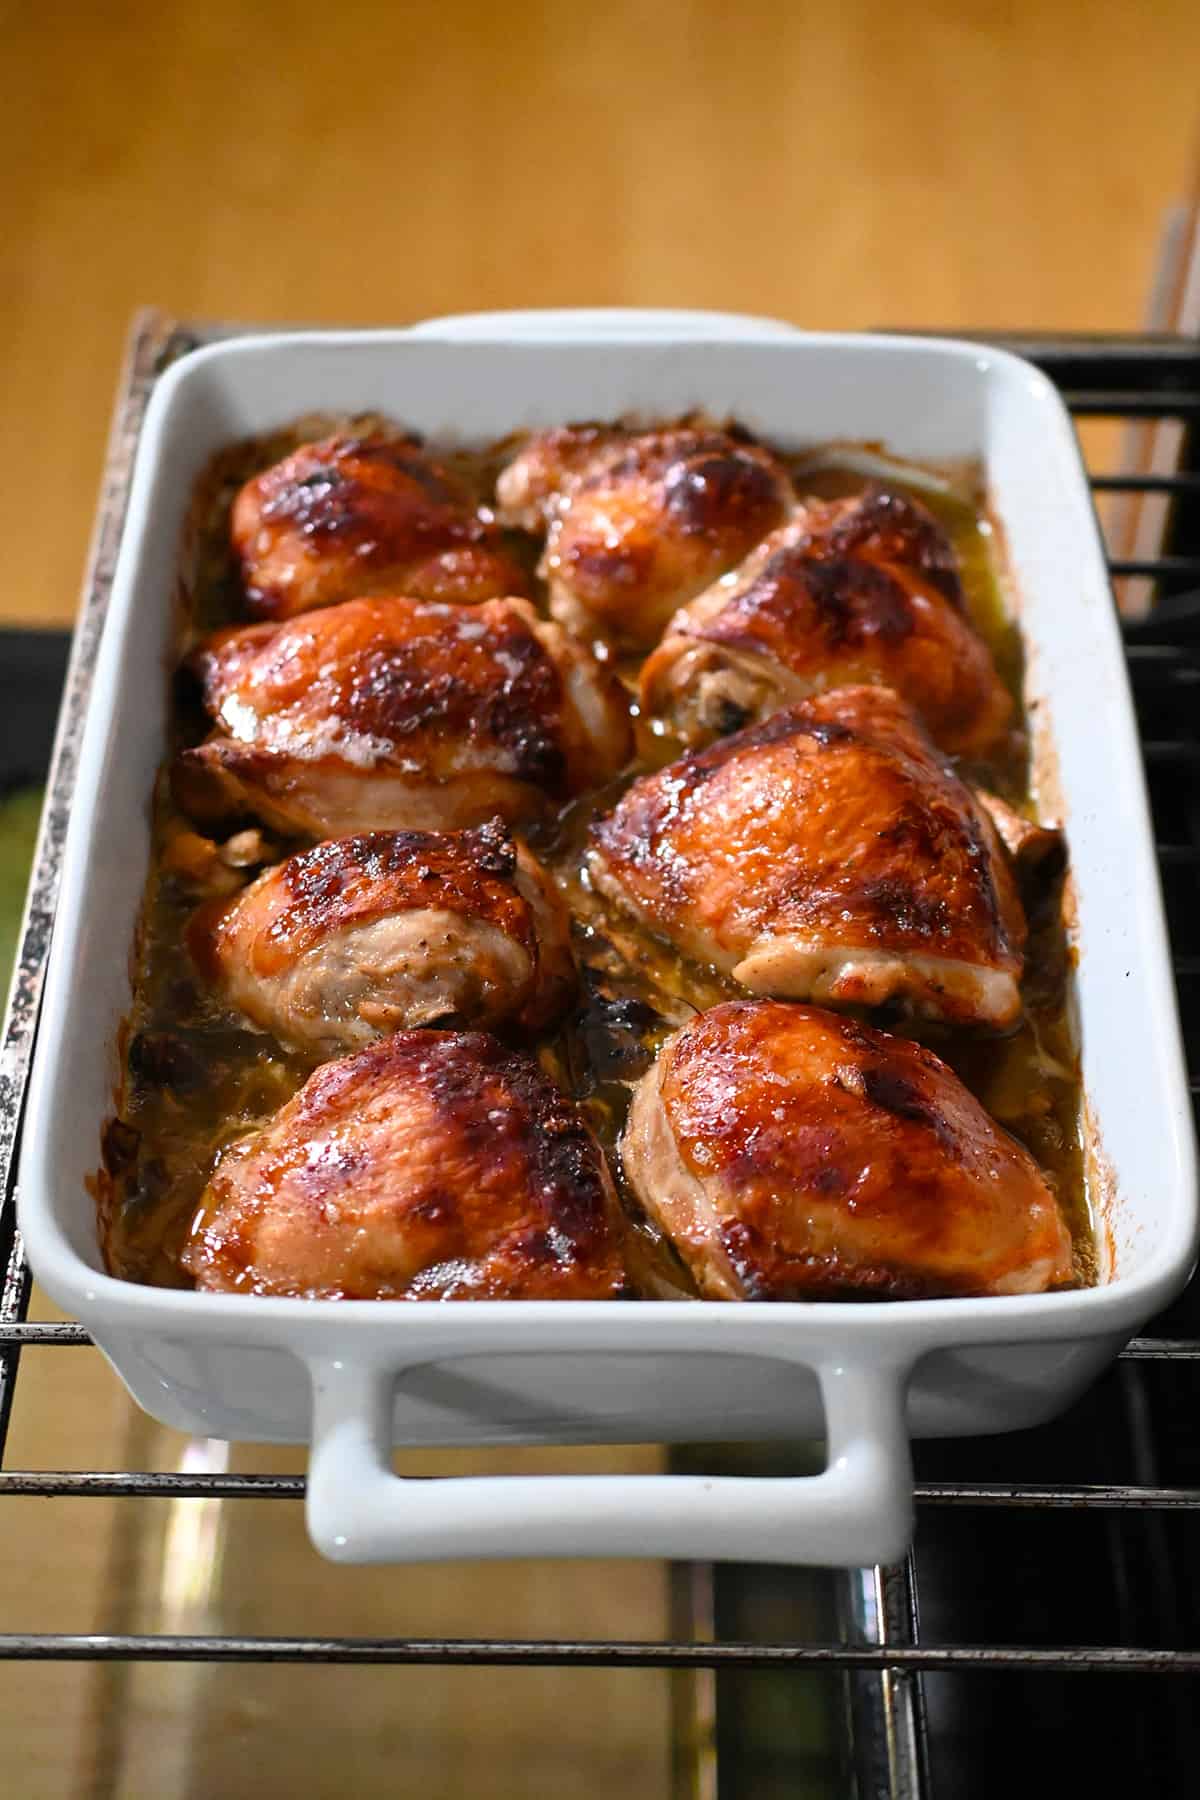 An open oven with a casserole dish filled with golden brown chicken thighs on top of tender roasted mushrooms.